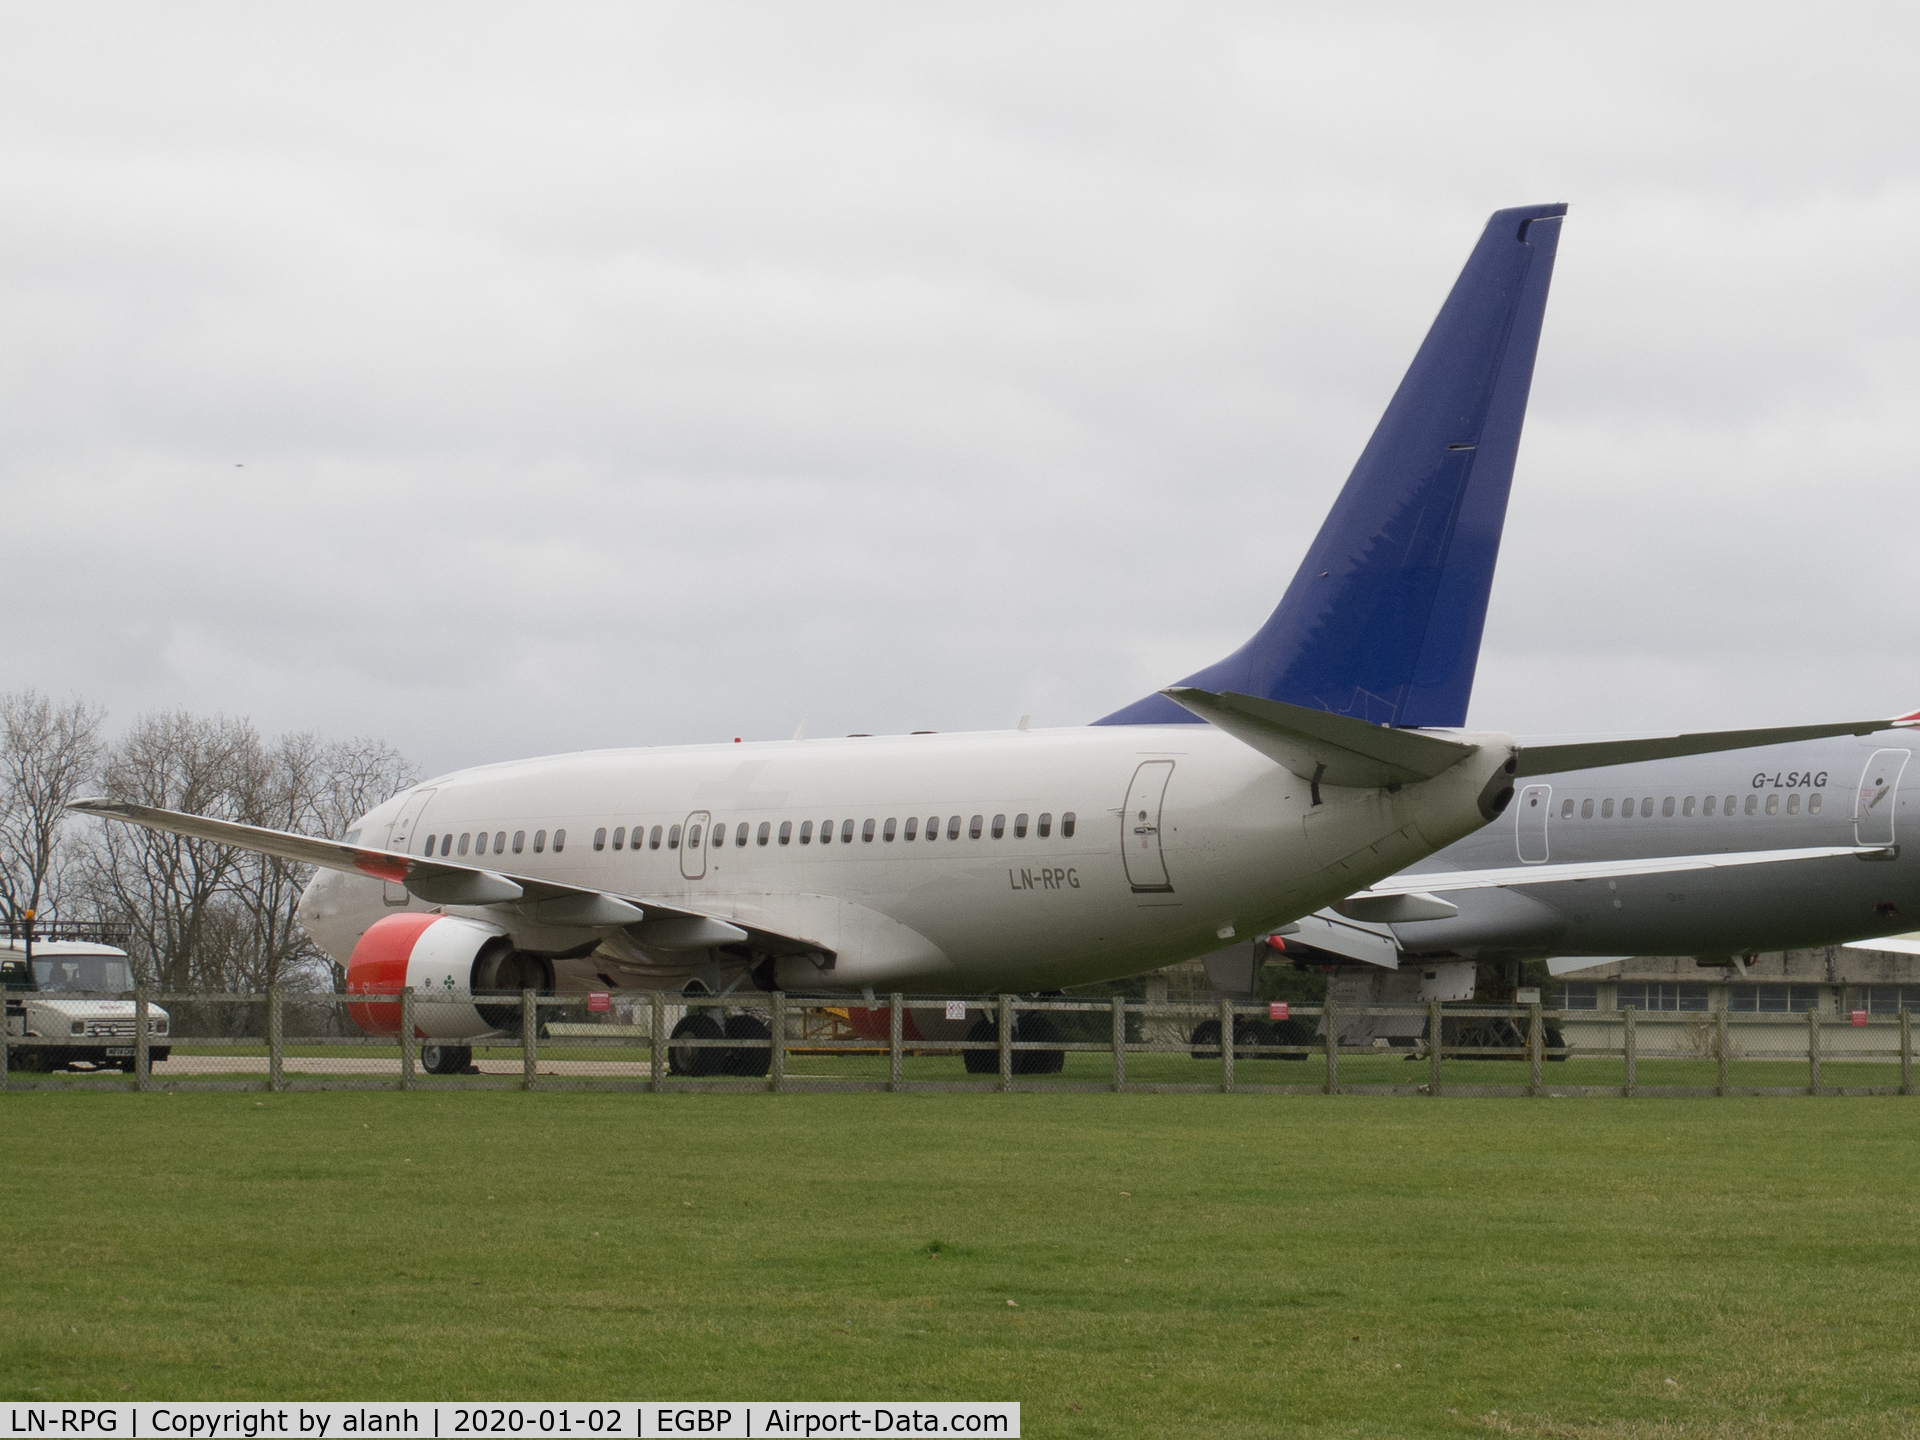 LN-RPG, 1999 Boeing 737-683 C/N 28310, Parked at Kemble, without titles